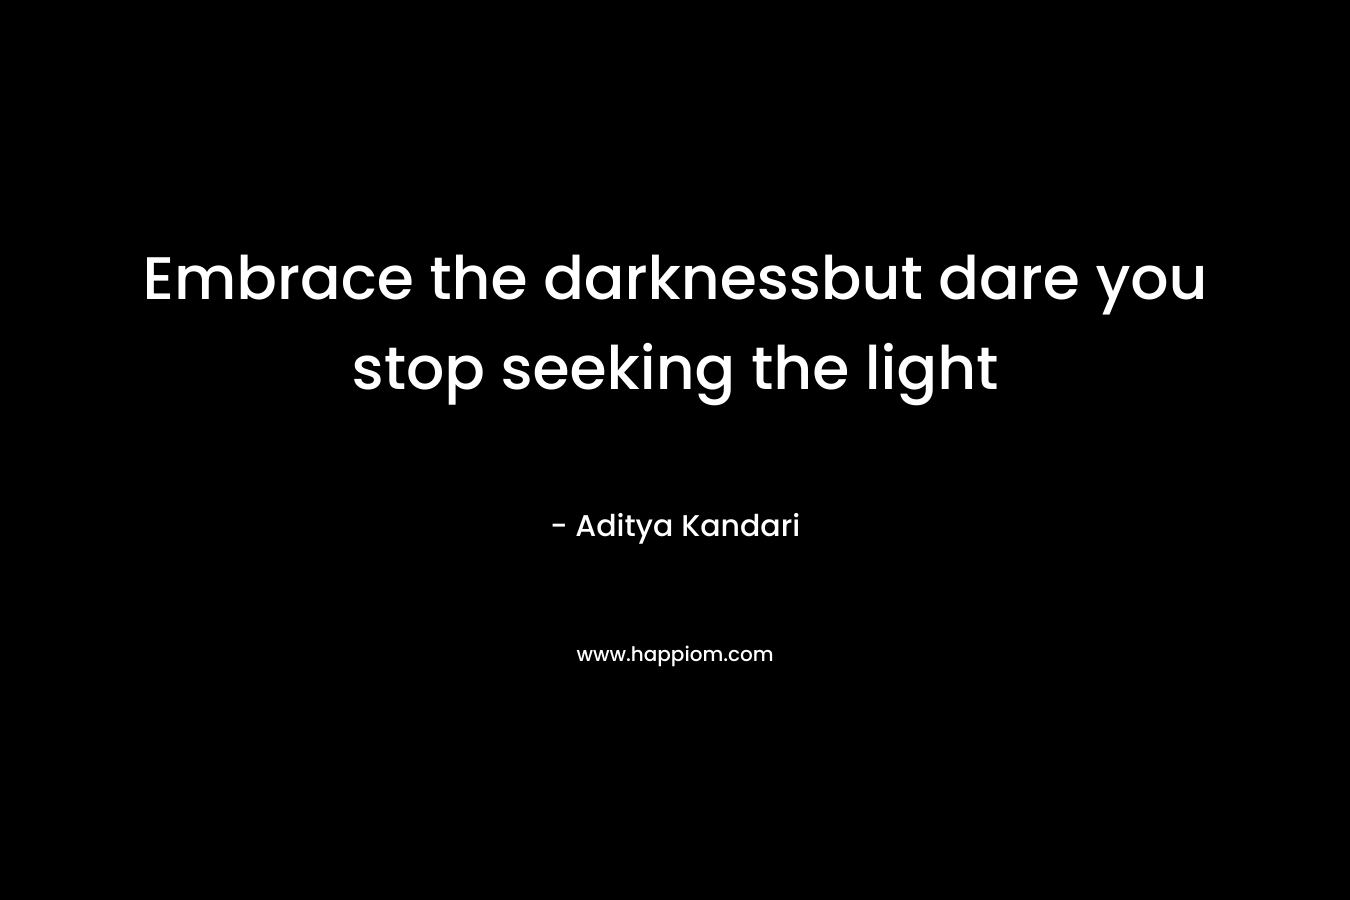 Embrace the darknessbut dare you stop seeking the light